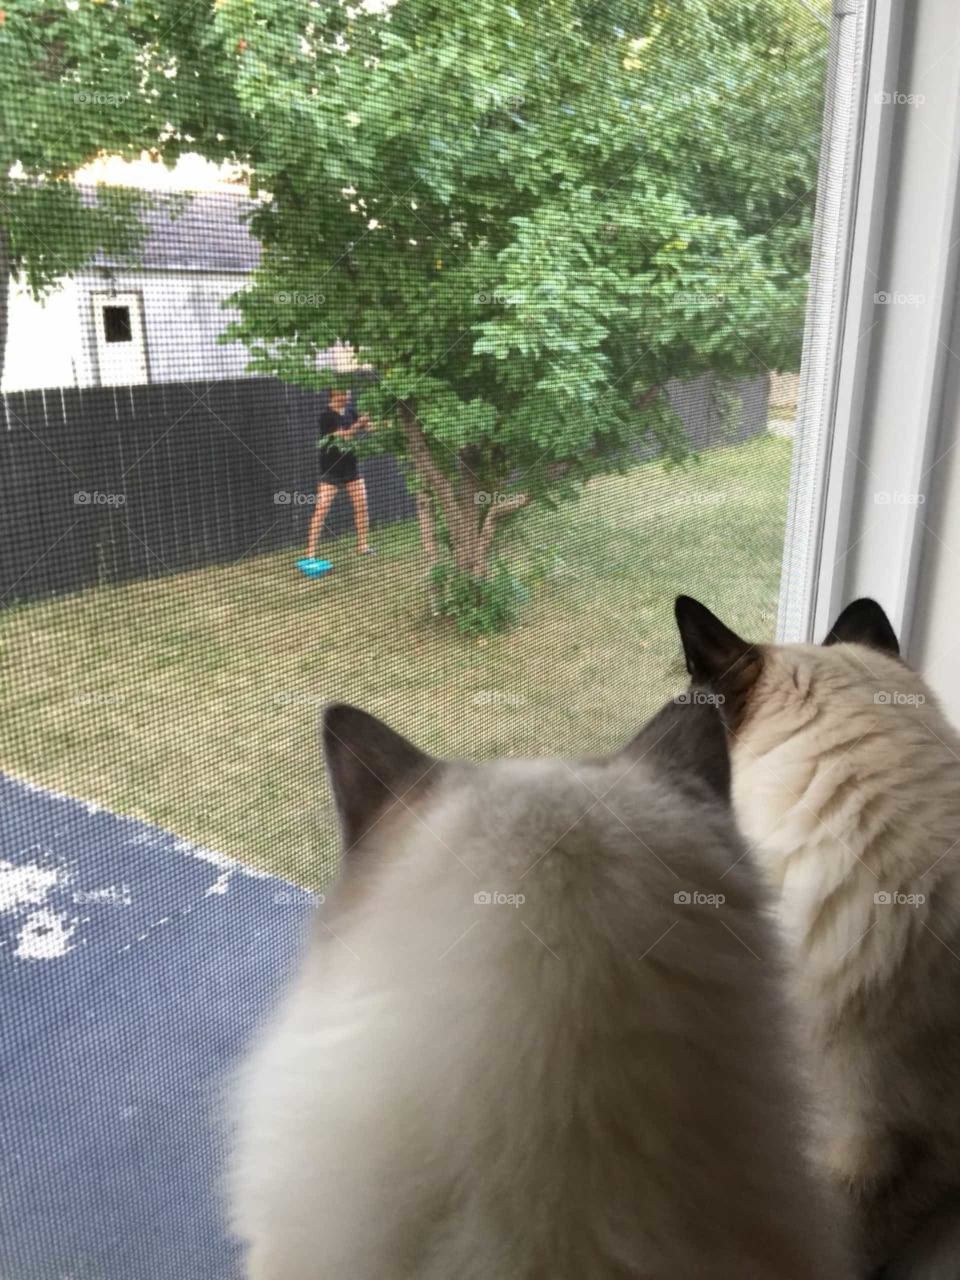 these 2 cats are looking and watching my brother grabbing an apple from the tree